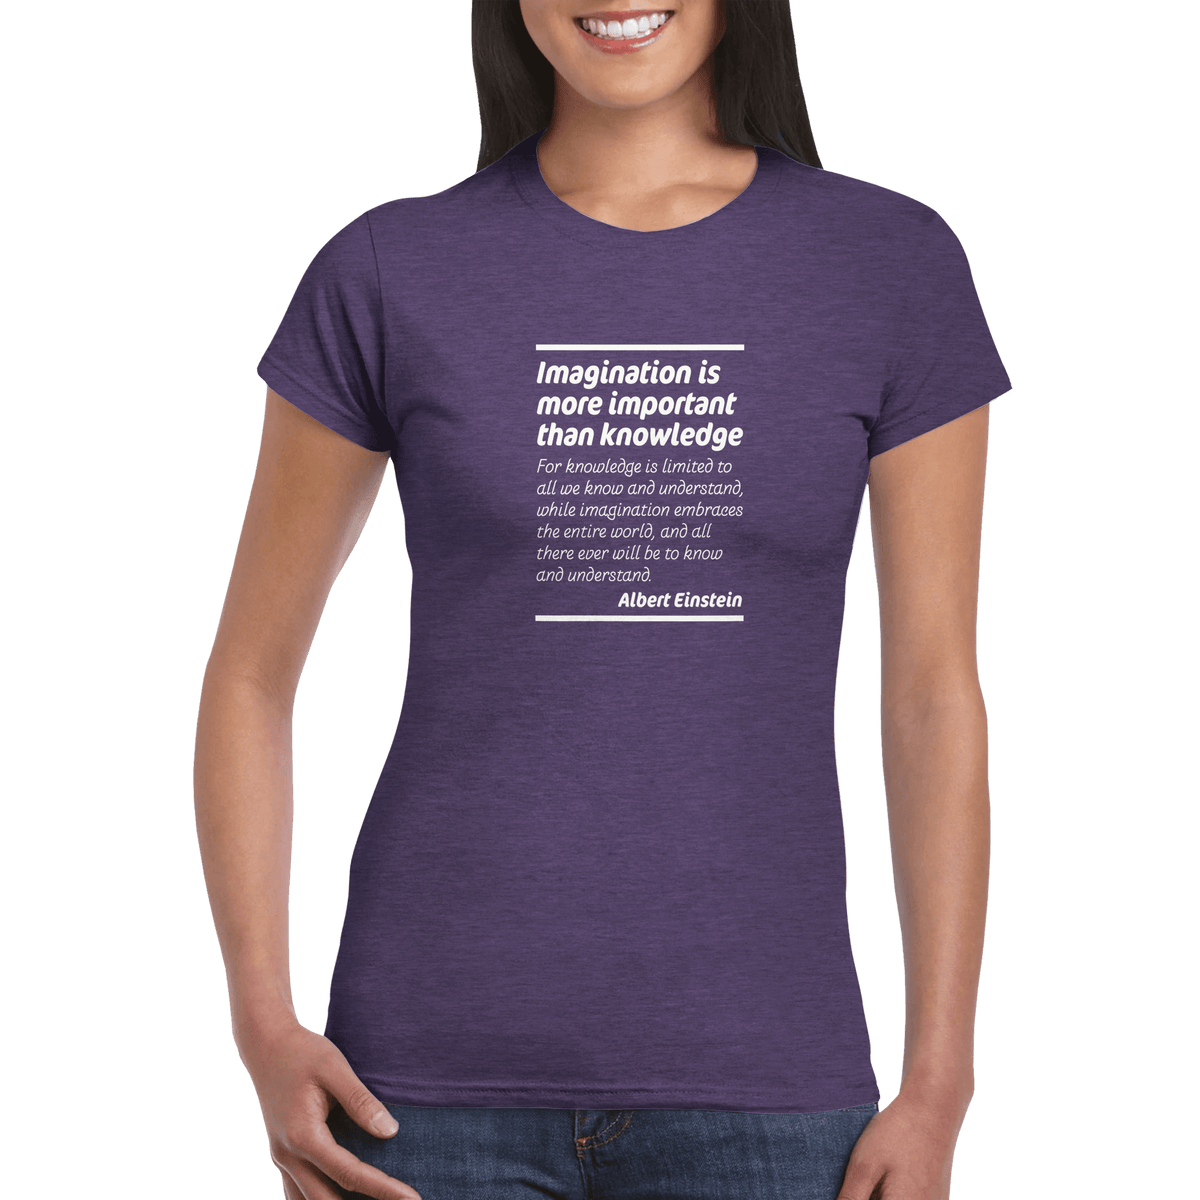 Womens Imagination Is More Important Than Knowledge purple heather t shirt - MangoBap